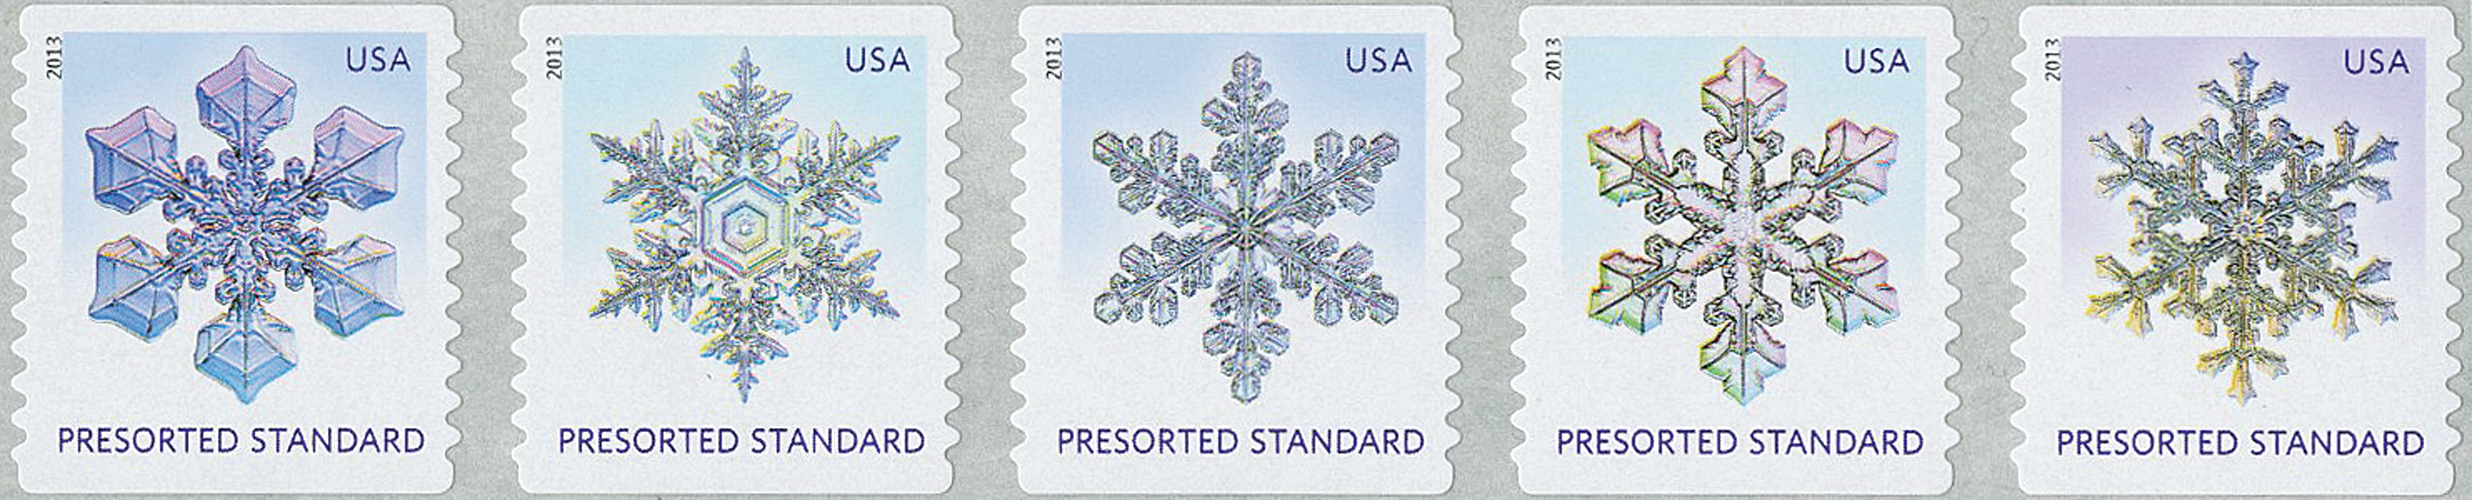 5031-34c - 2015 First-Class Forever Stamp - Imperforate Geometric